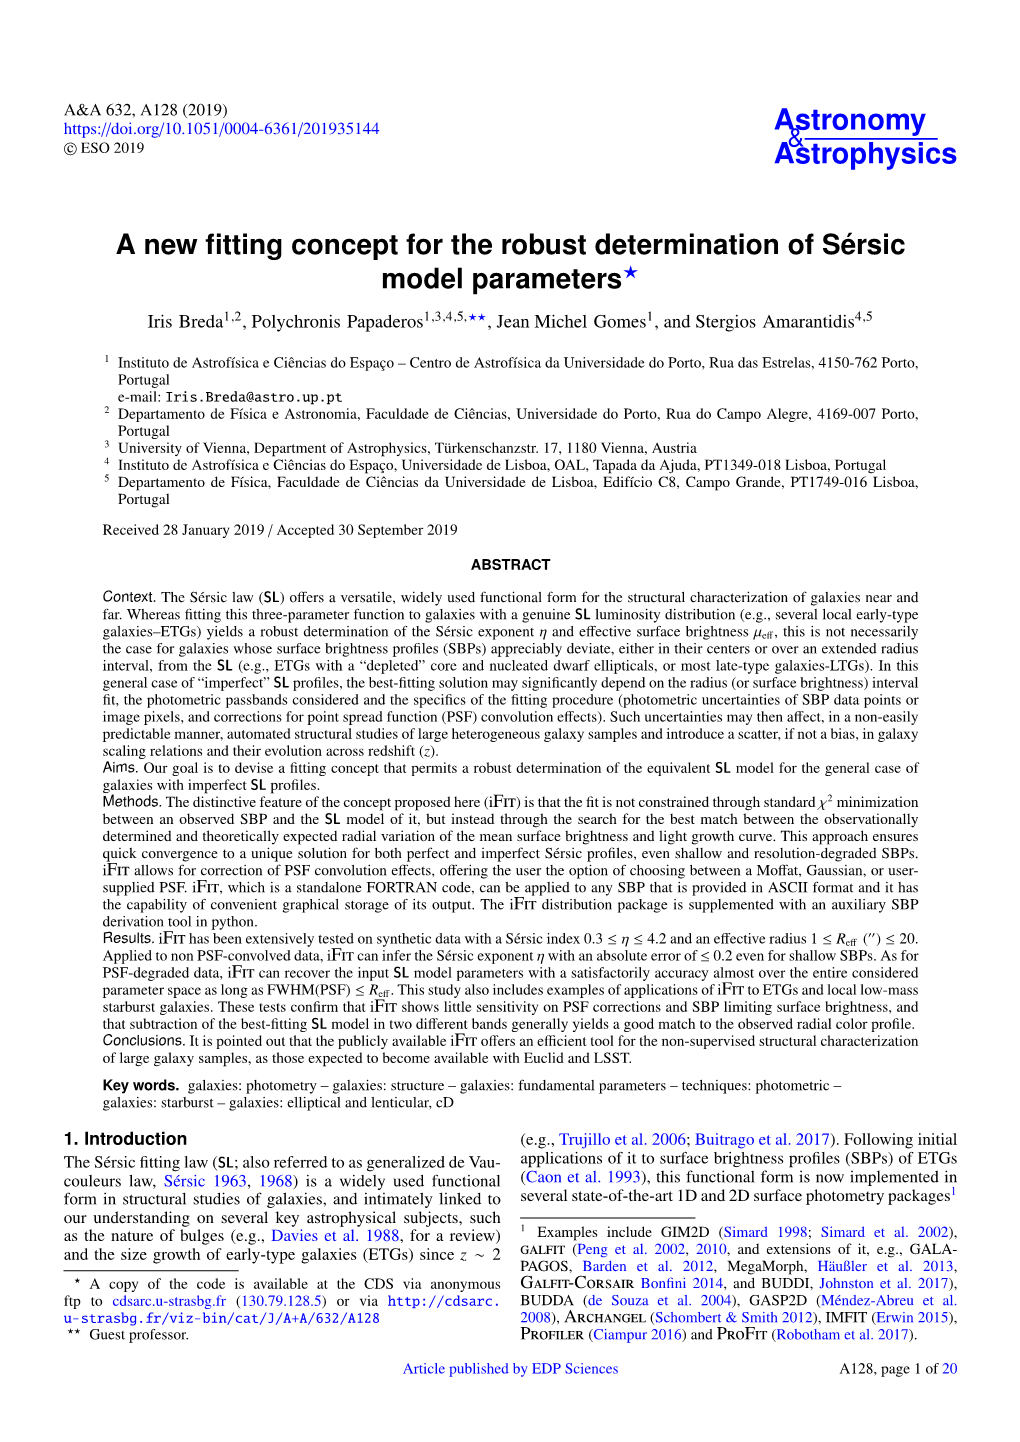 A New Fitting Concept for the Robust Determination of Sérsic Model